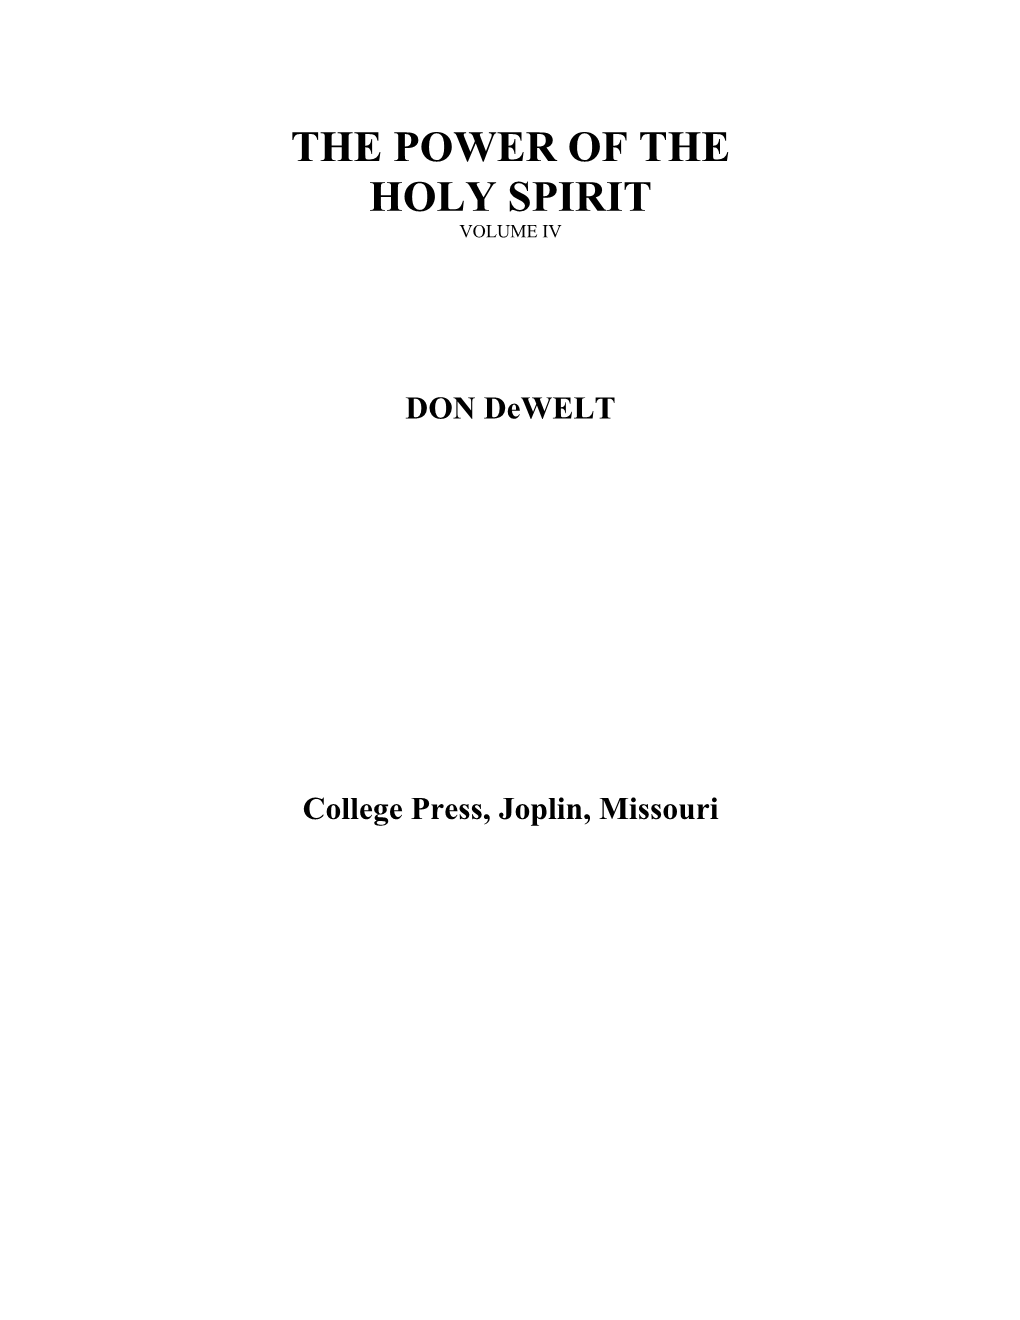 THE POWER of the HOLY SPIRIT Volume 4